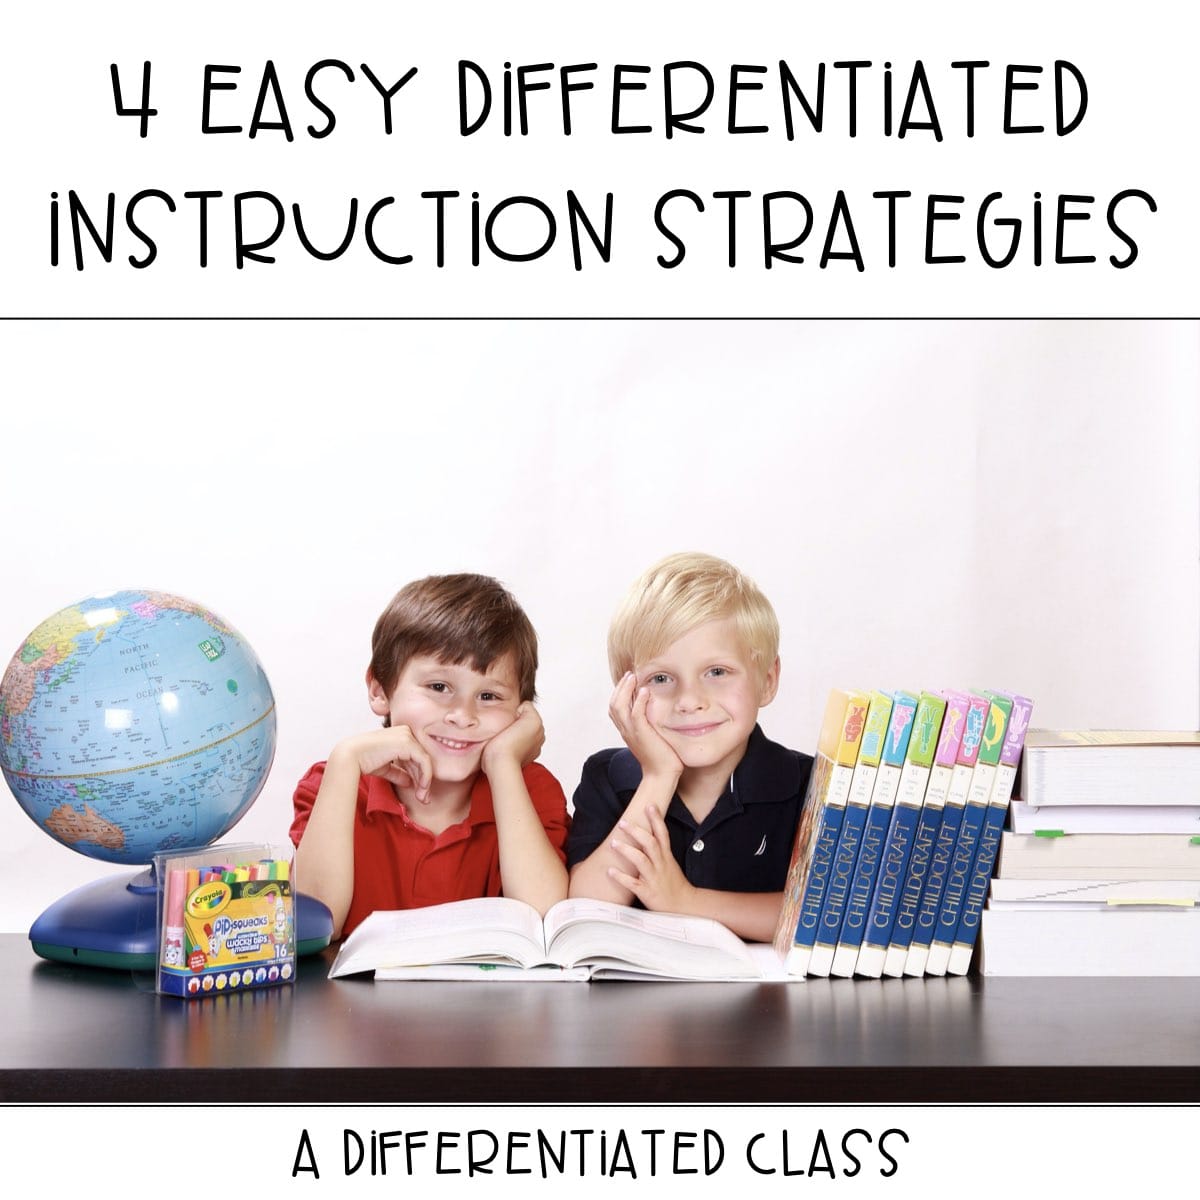 research on differentiated instruction articles